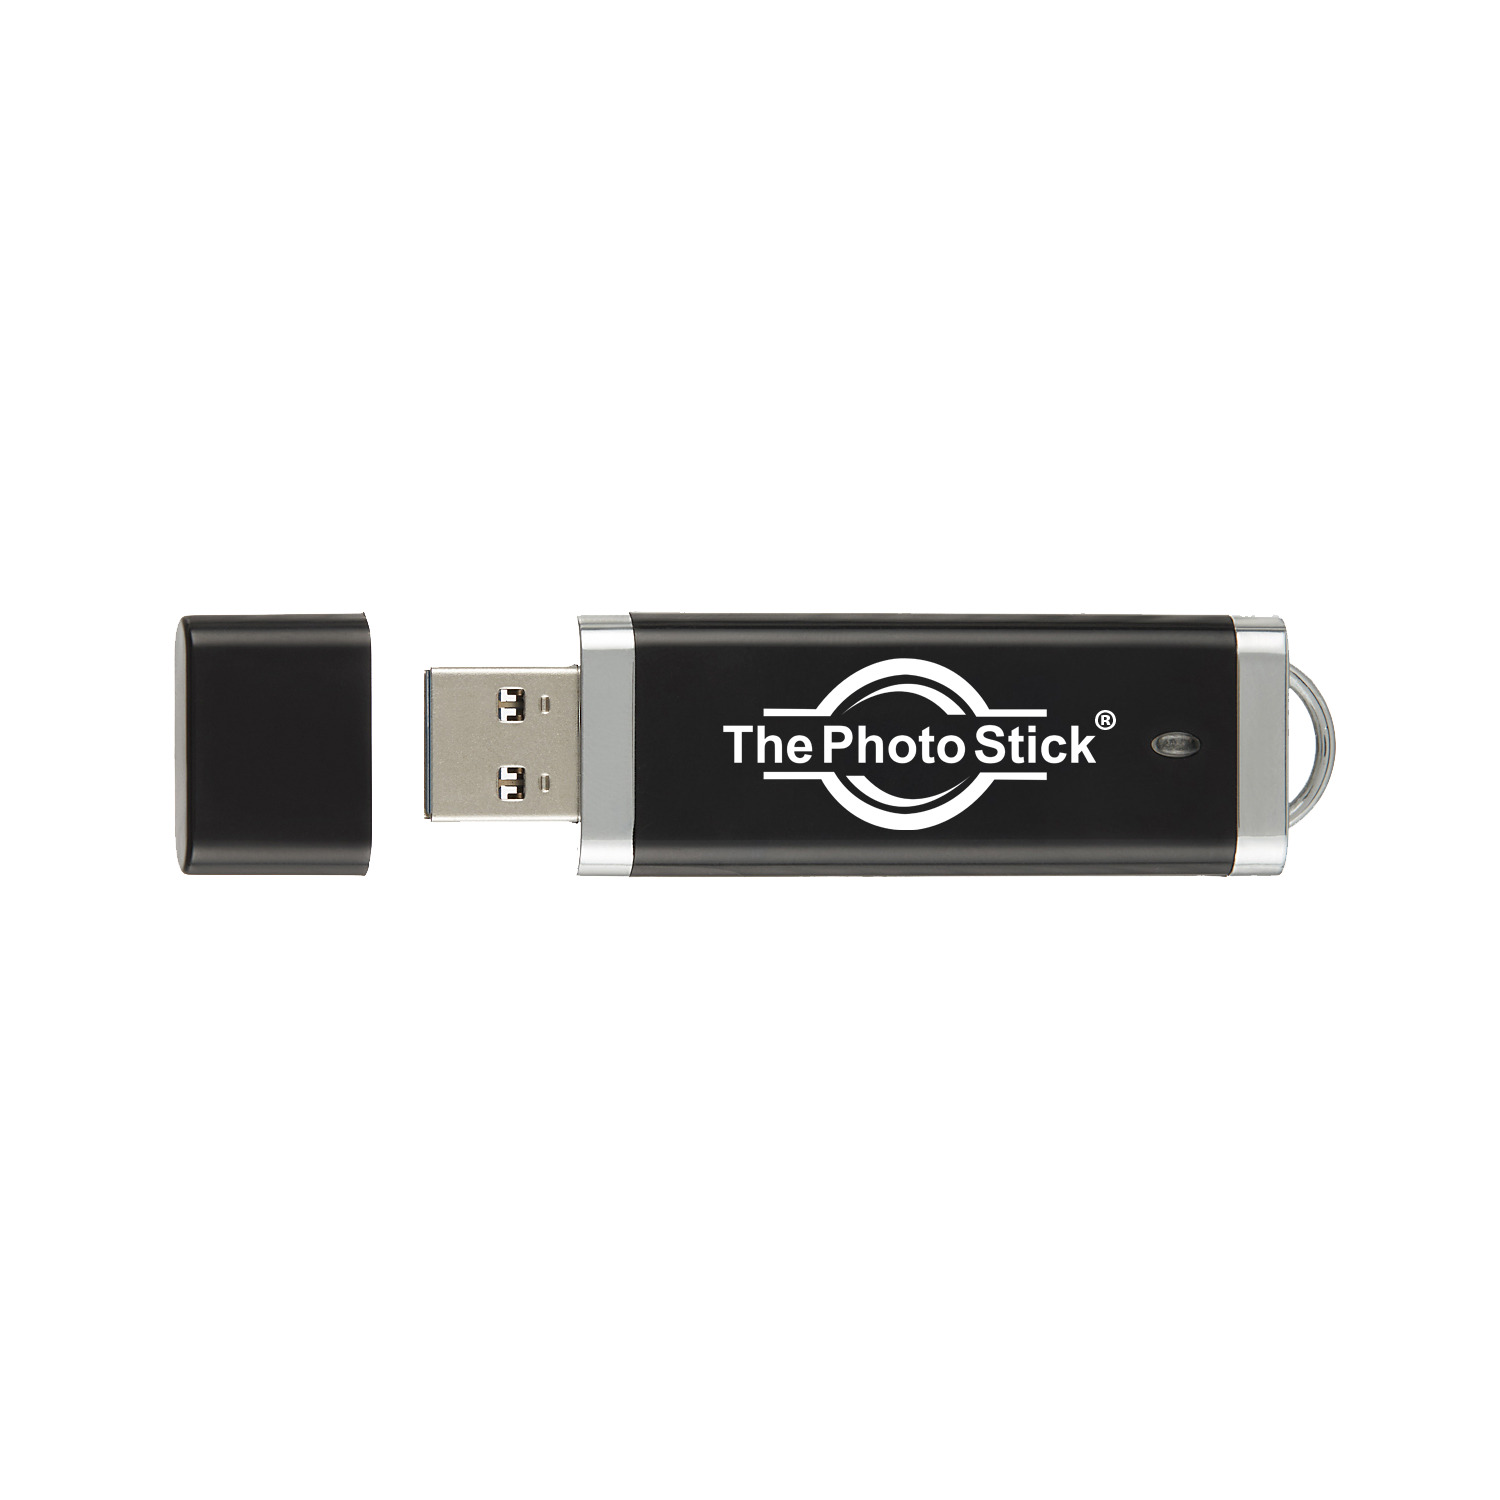 ThePhotoStick 128GB Backup Storage for Mac and Windows Computers and Laptops